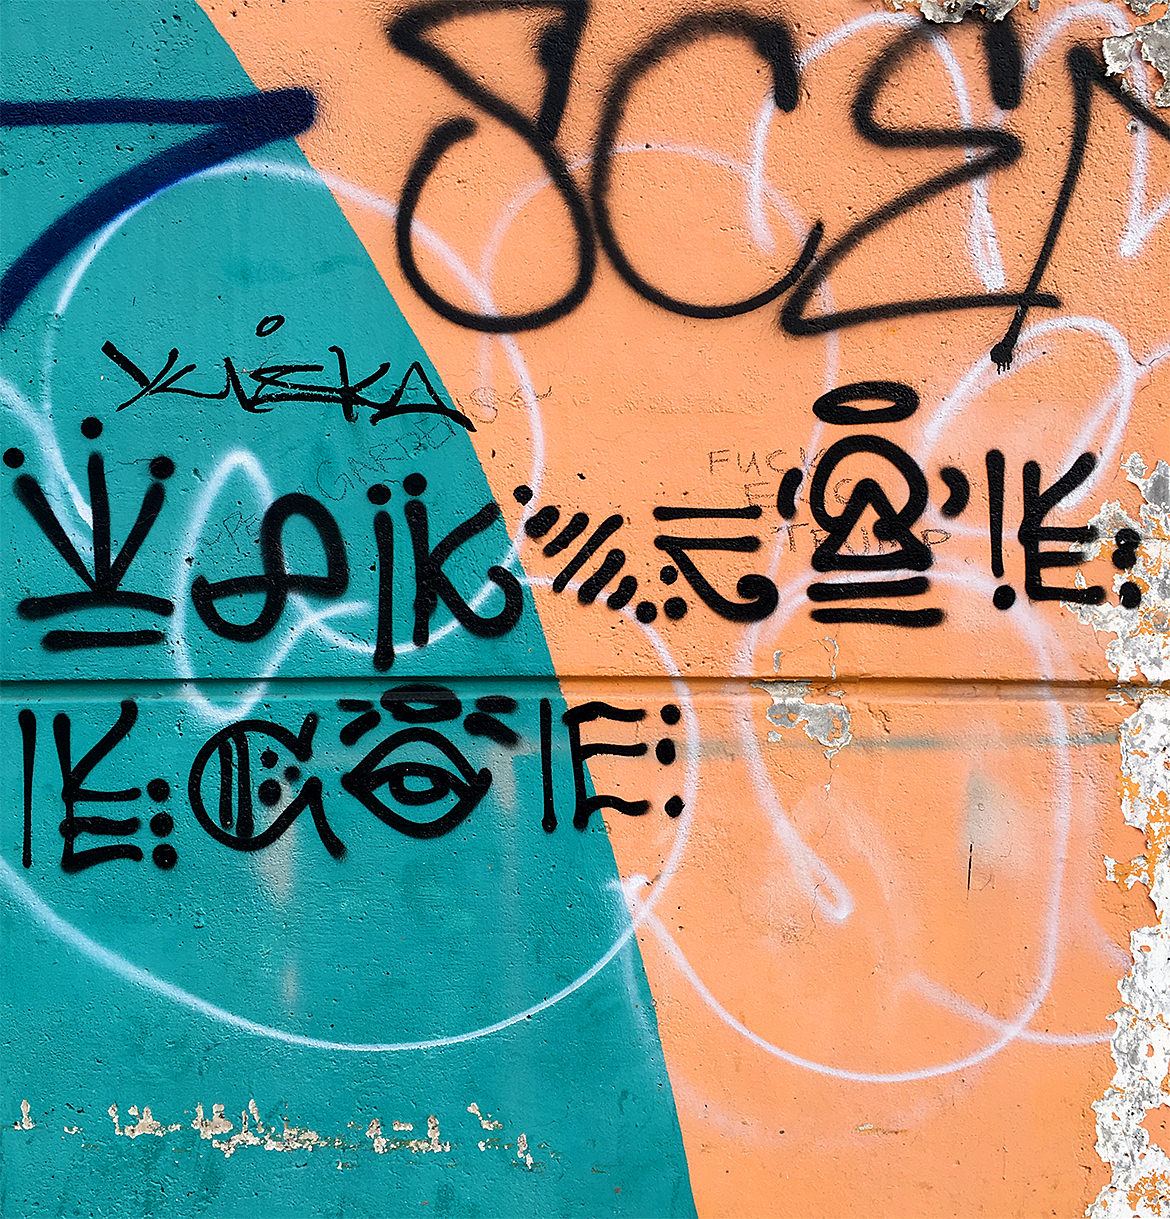 teal and orange wall with spray paint hieroglyphics